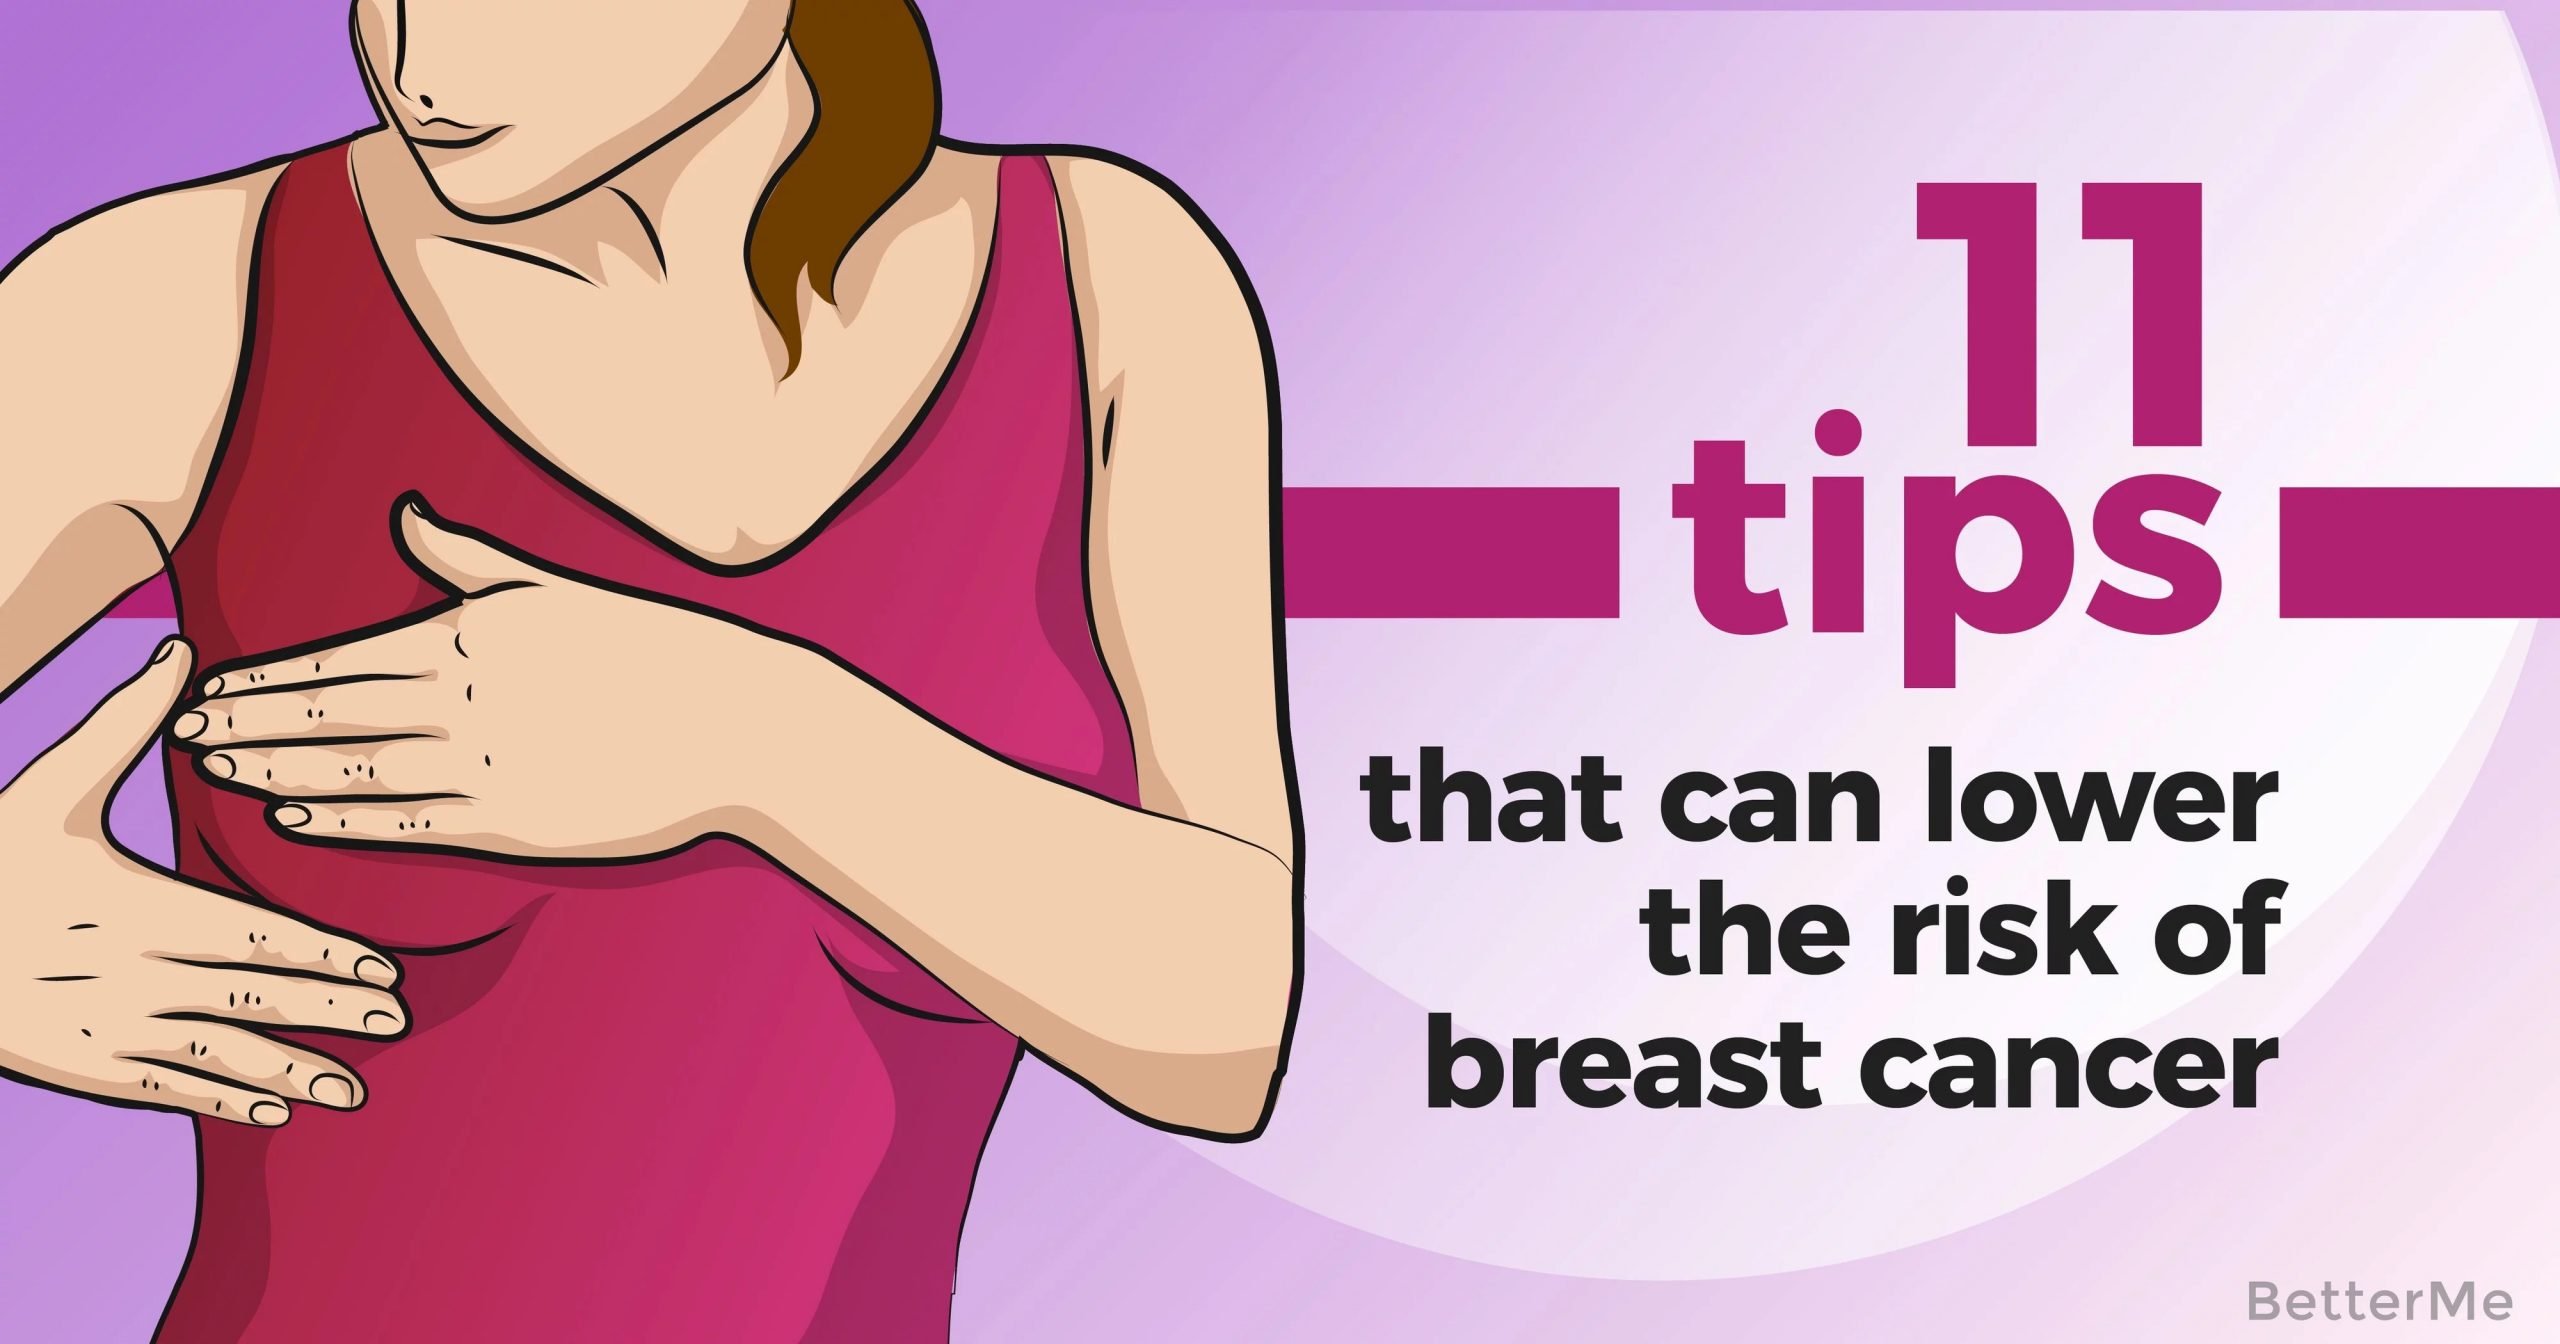 11 tips that can lower the risk of breast cancer